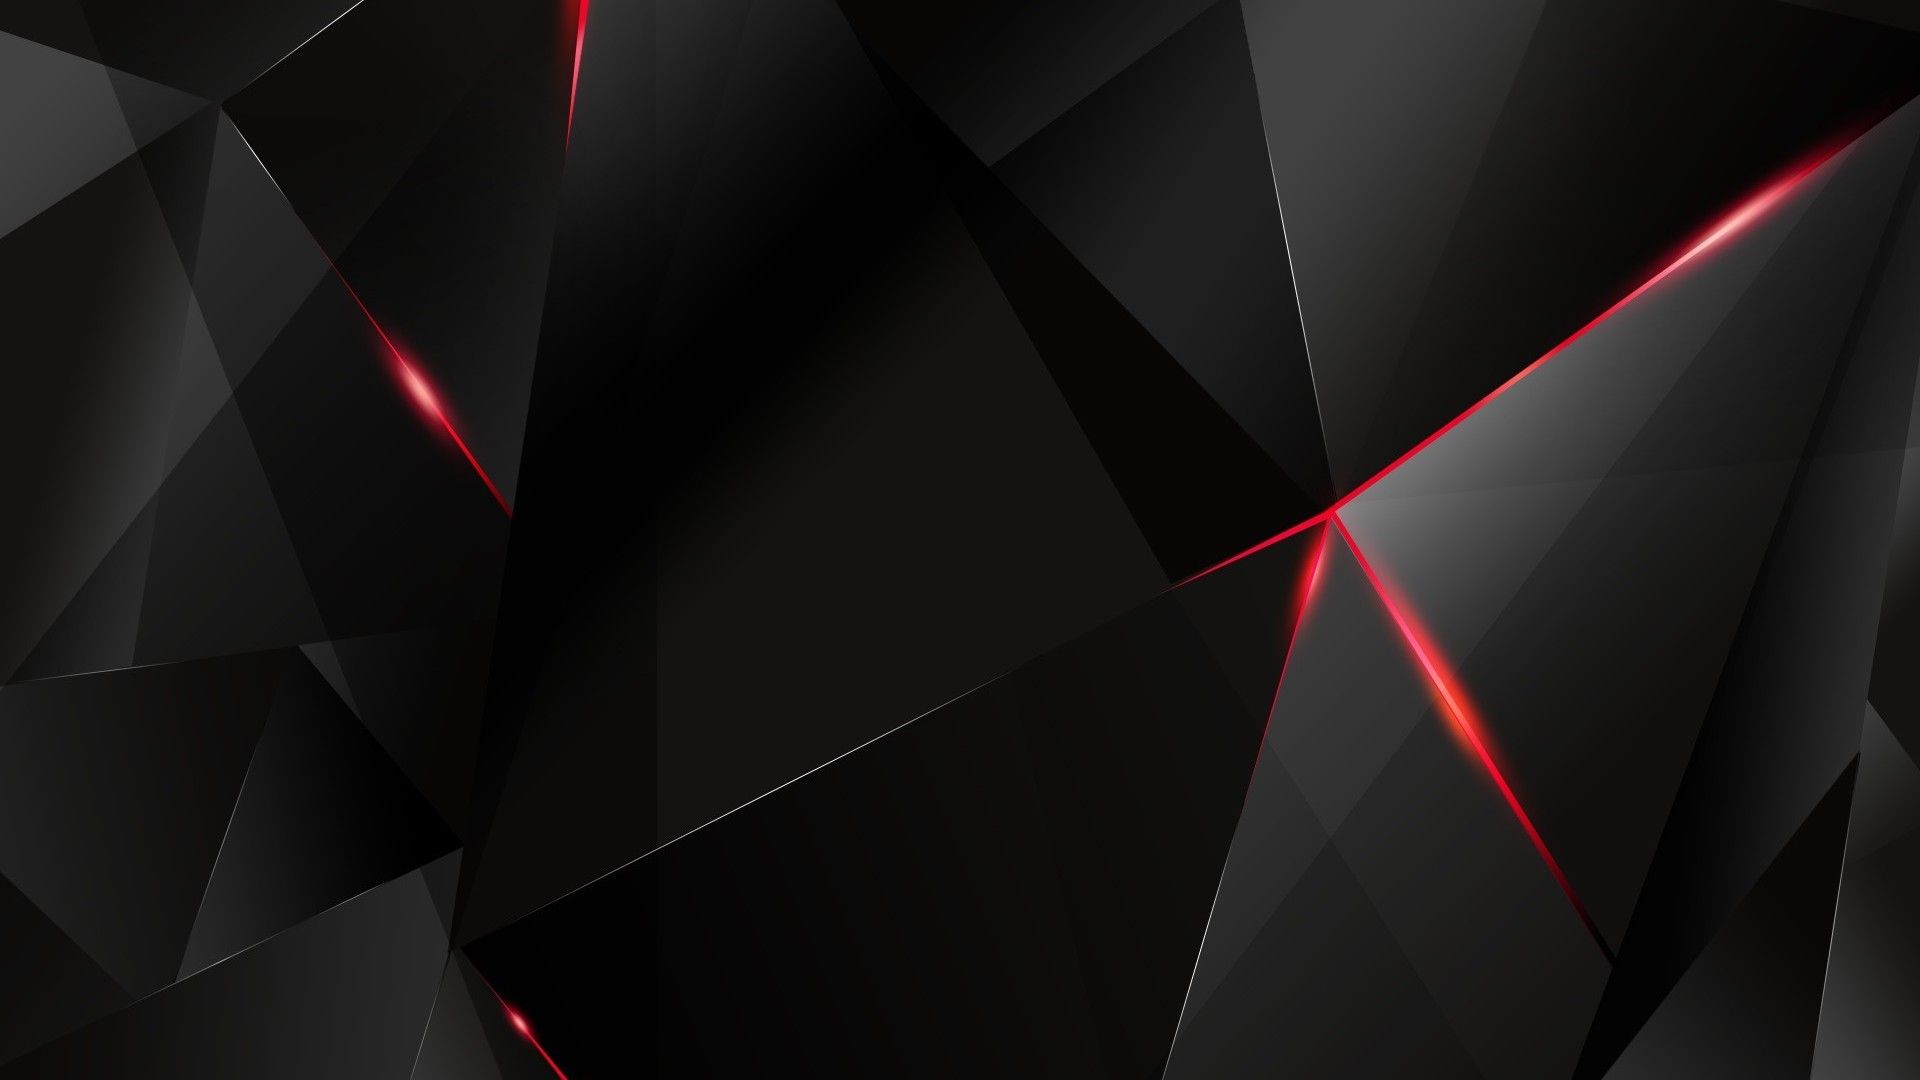 Black and Red Abstract Wallpapers 1284 - HD Wallpaper Site